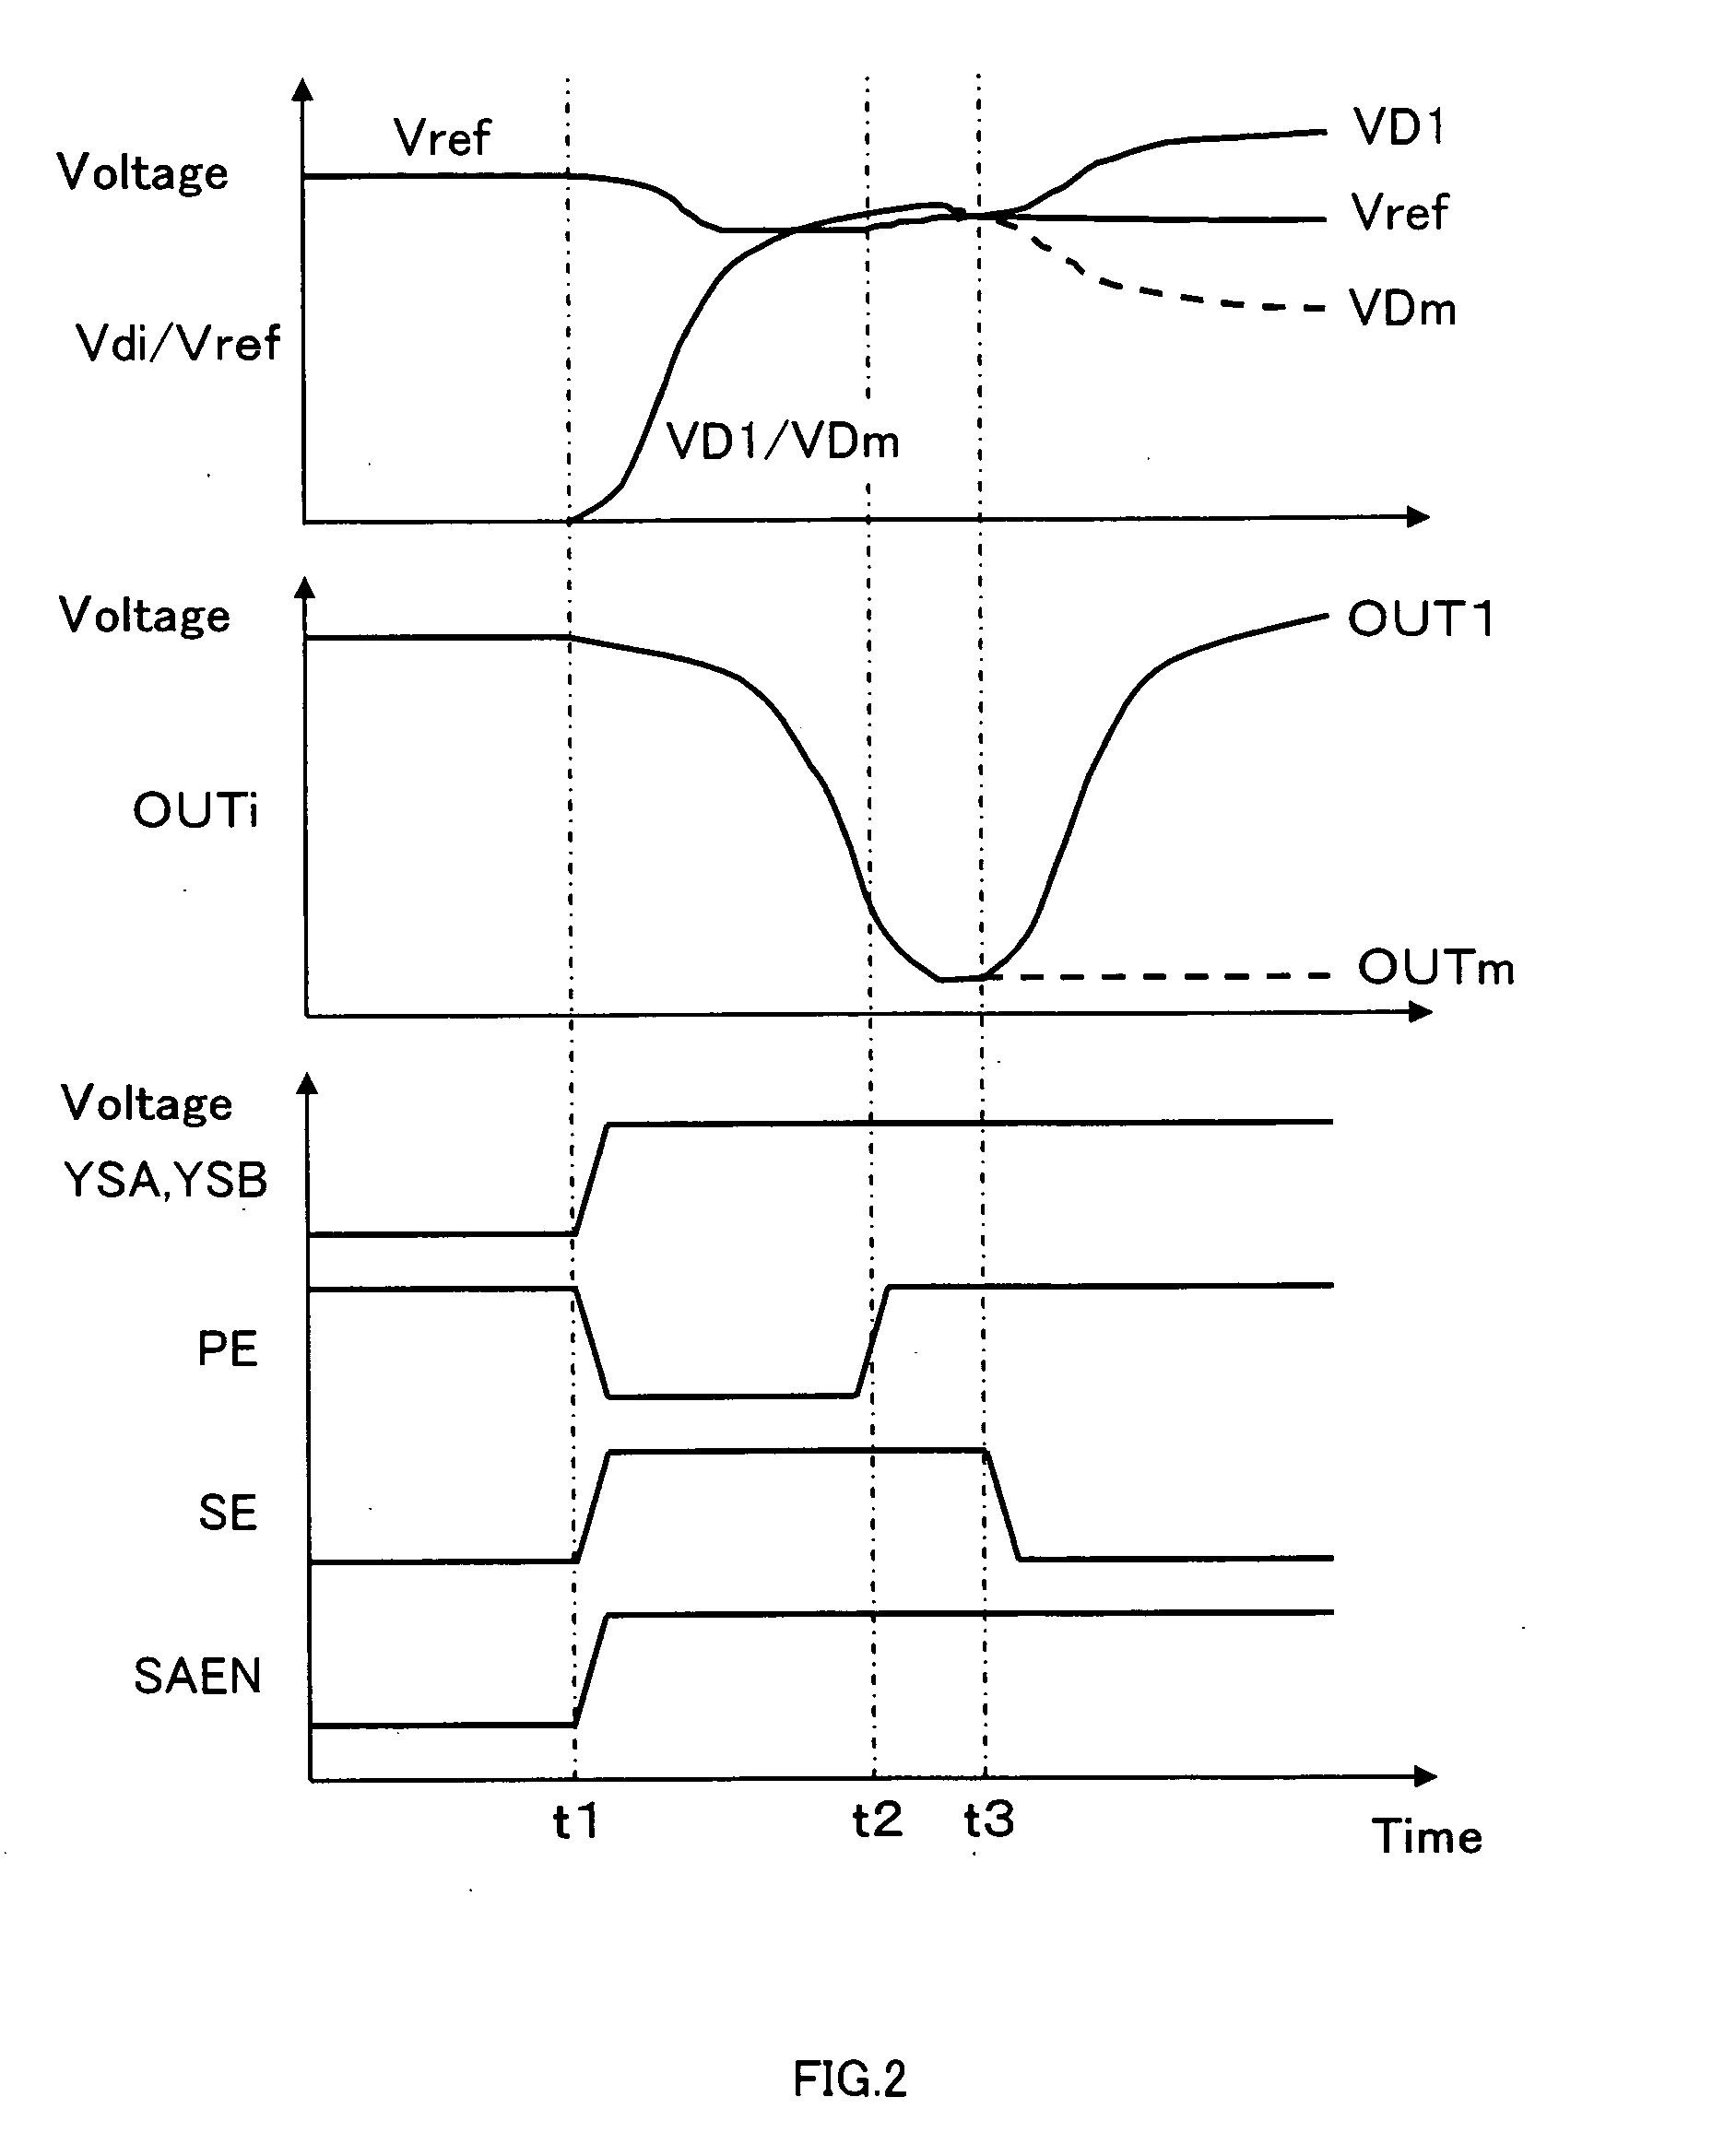 Semiconductor readout circuit